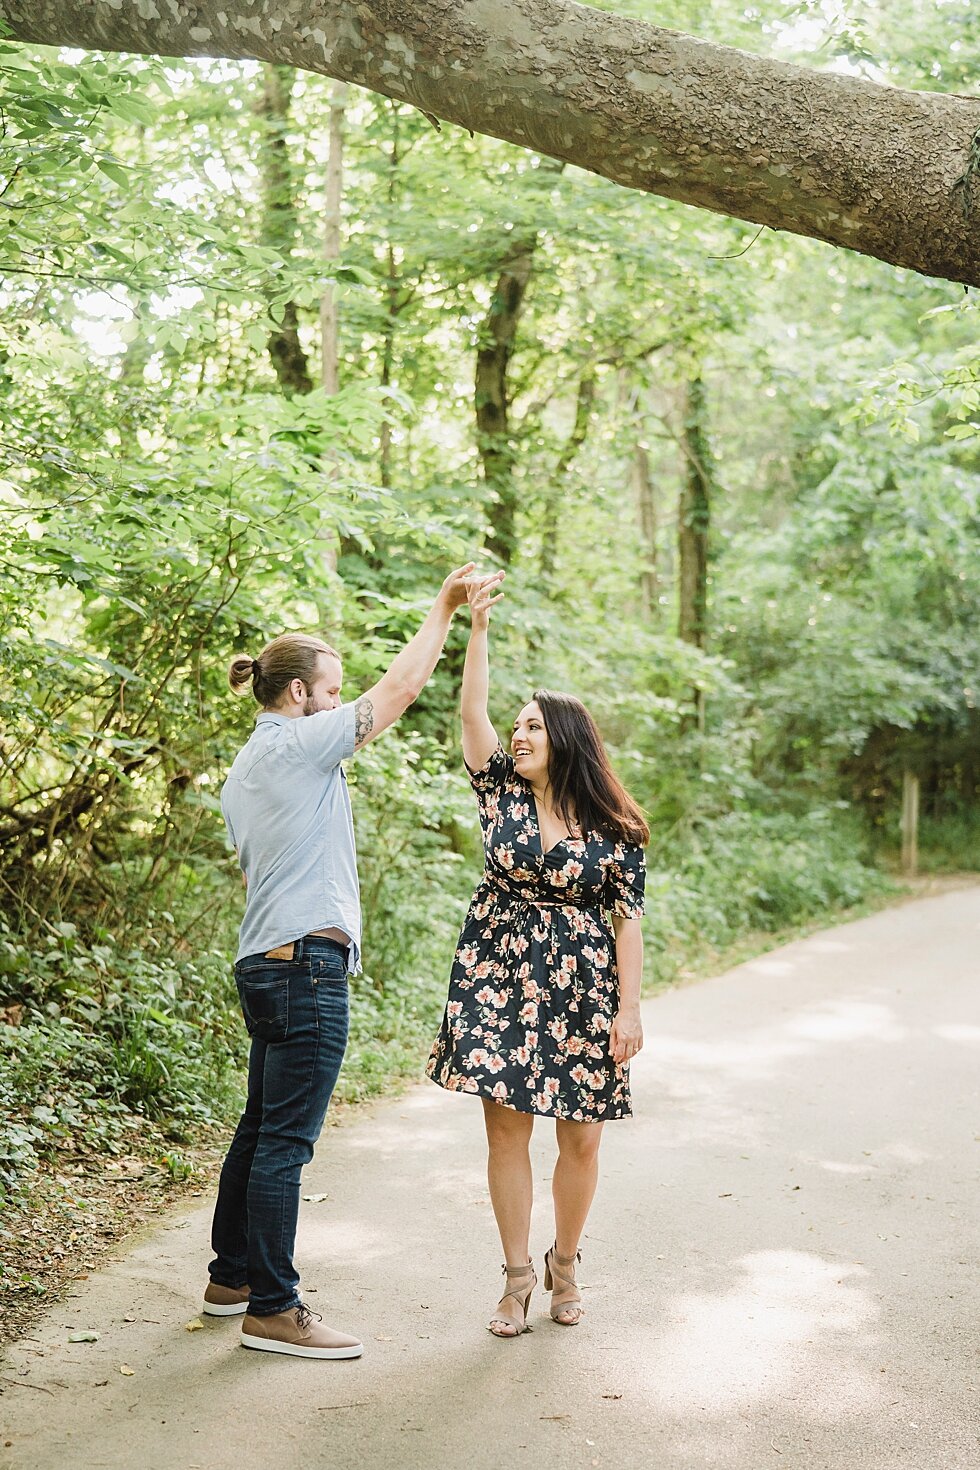  This soon to be bride and groom didn’t waste any time on their walk as they danced along the path. #engagementgoals #engagementphotographer #engaged #outdoorengagement #kentuckyphotographer #indianaphotographer #louisvillephotographer #engagementpho